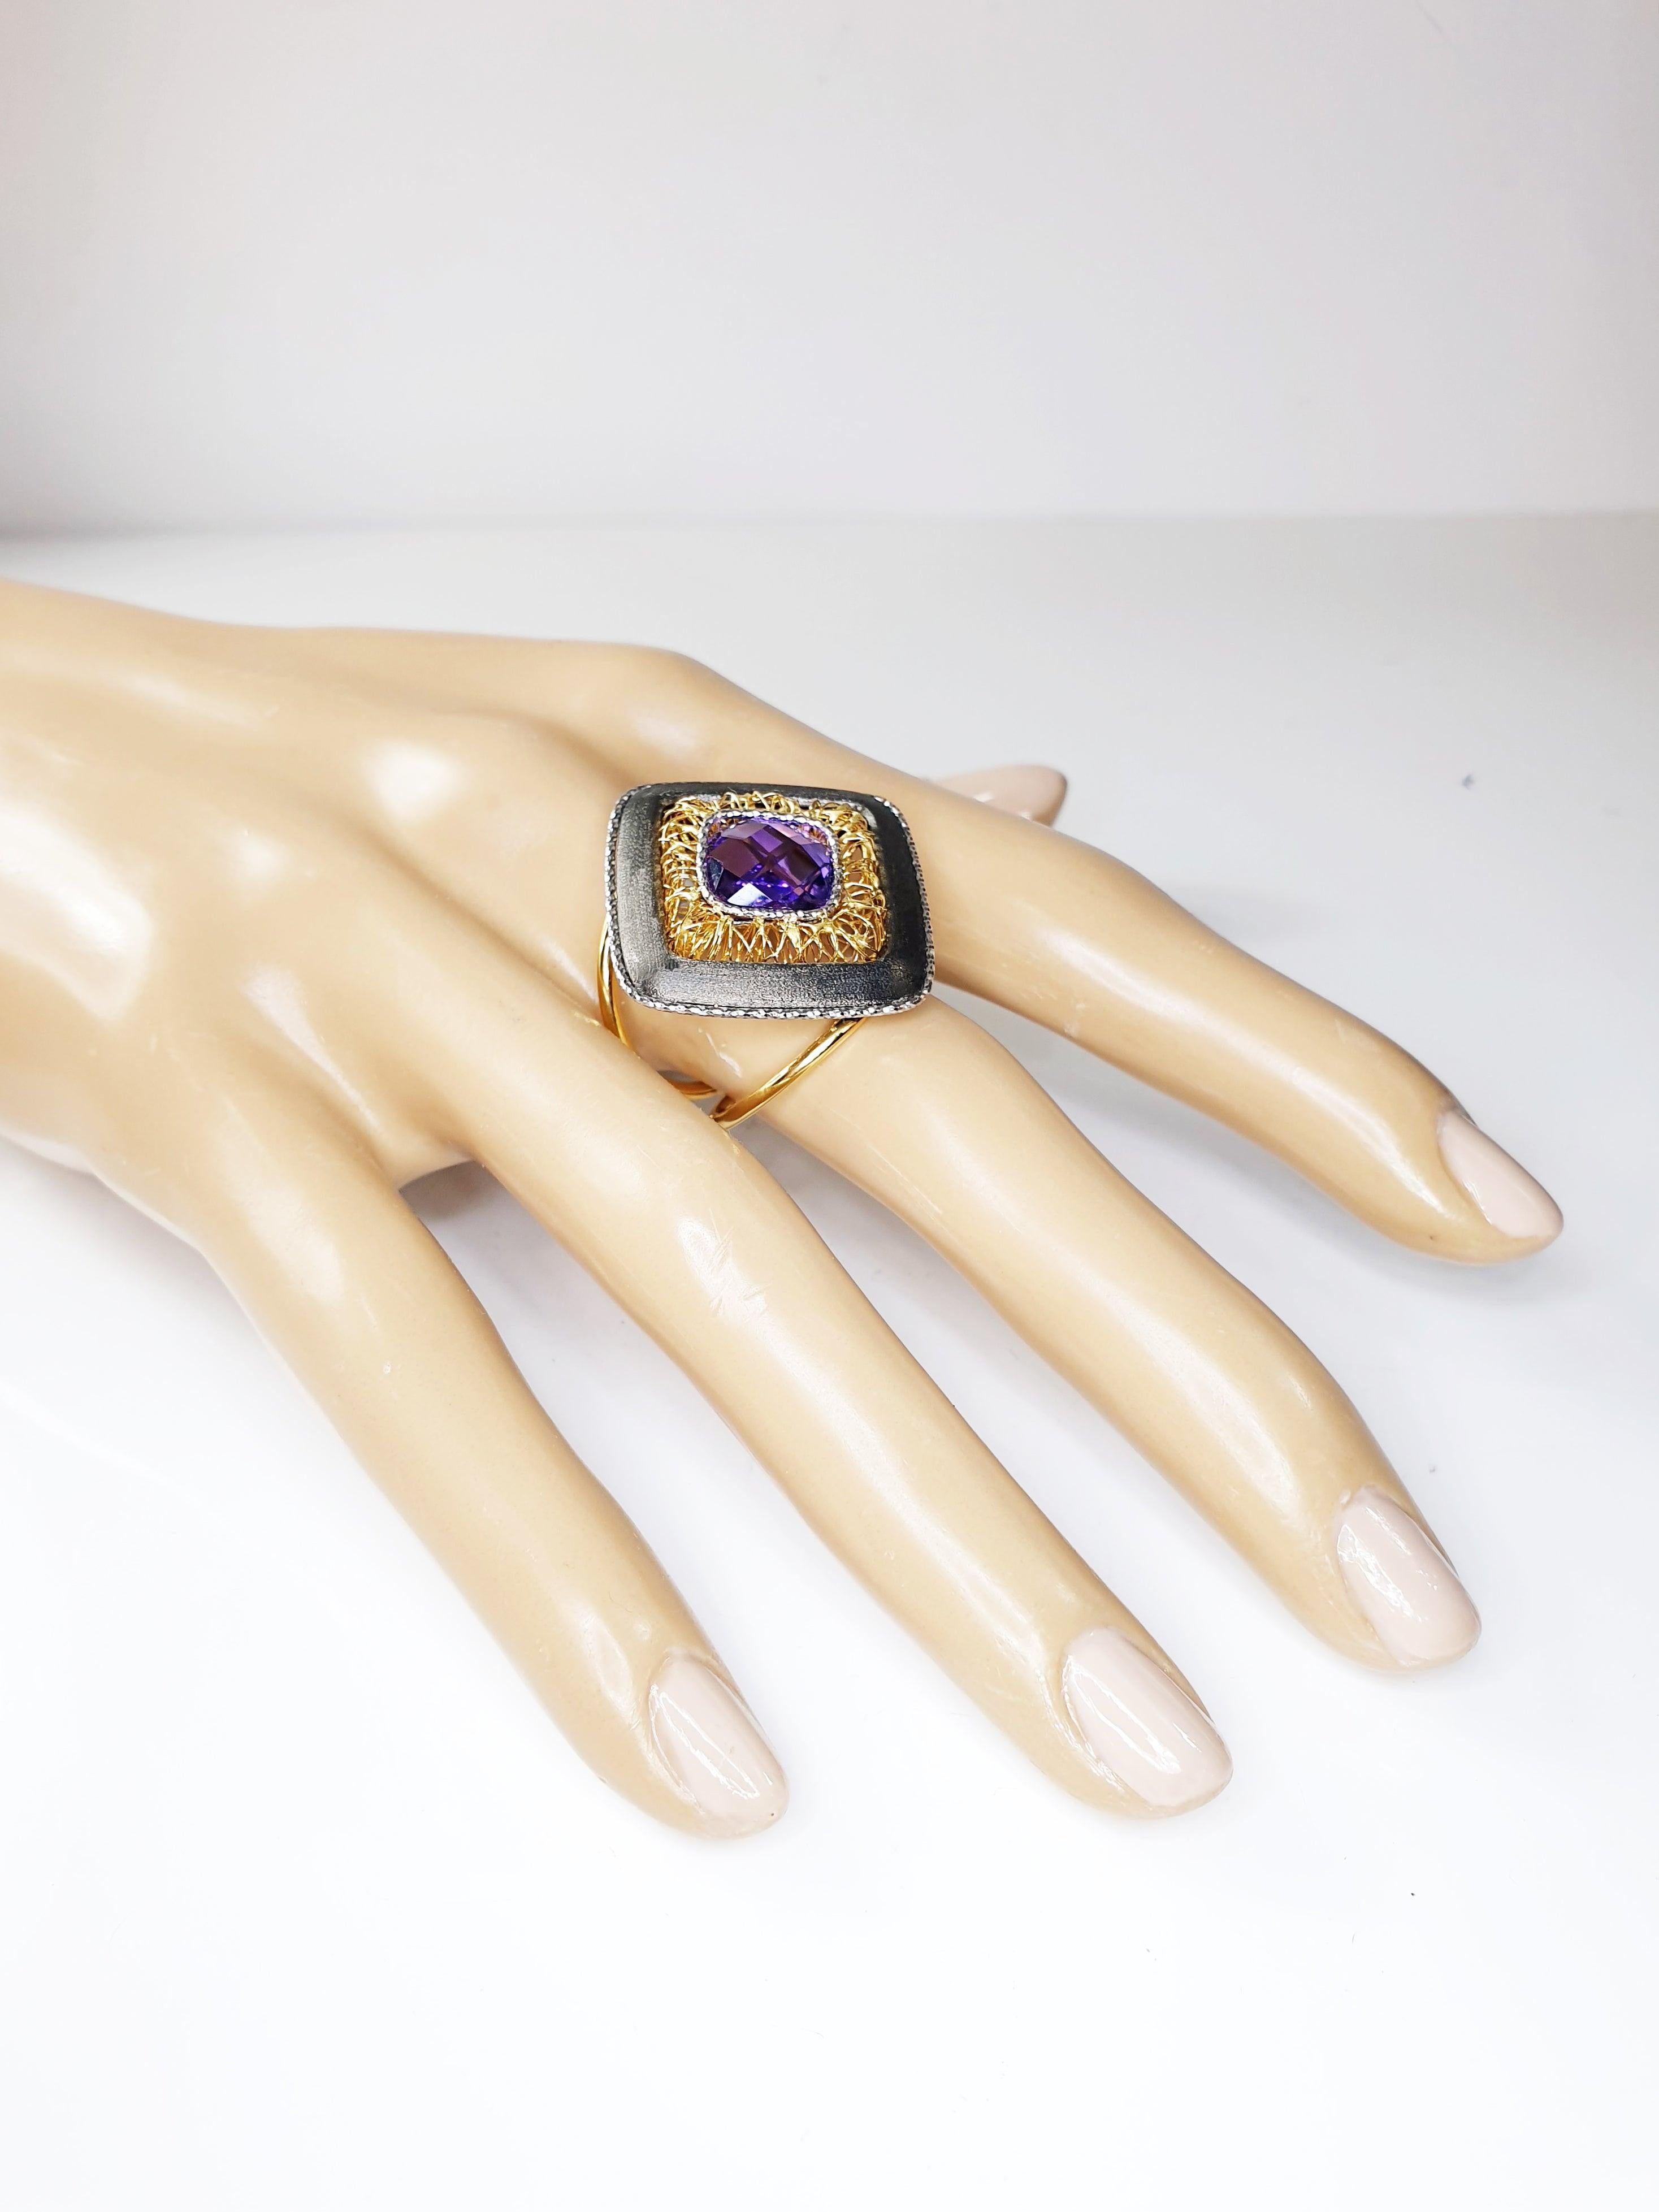 For Sale:  Multifaceted Amethyst in Titatium and 18 Karat White and Yellow Gold Ring 8